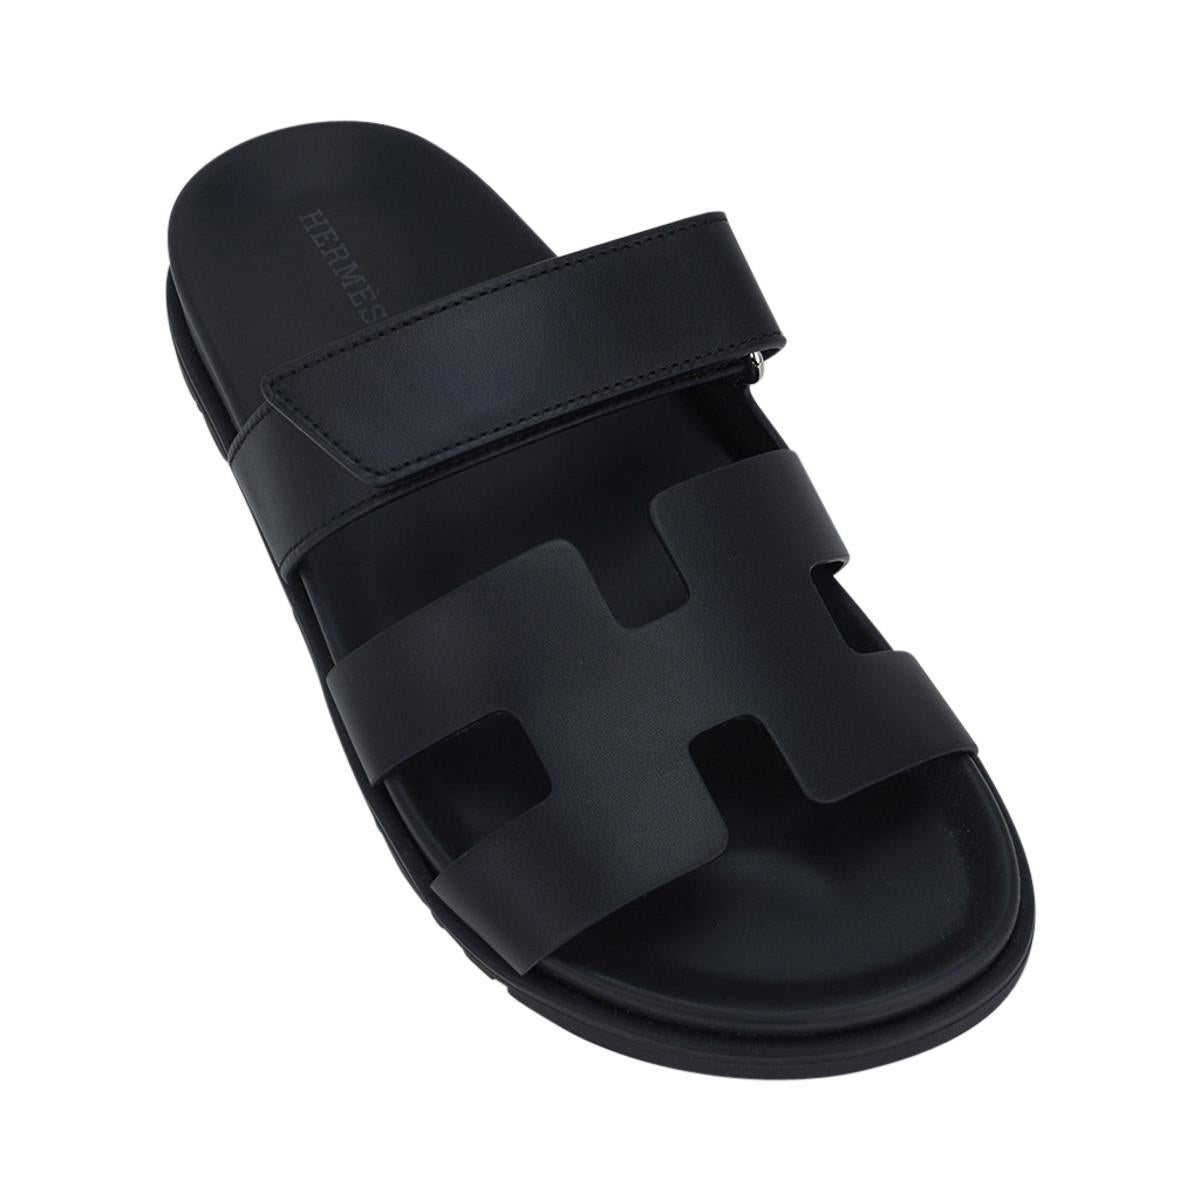 Hermes Chypre Black Calfskin Sandal 39.5 / 9.5 In New Condition For Sale In Miami, FL